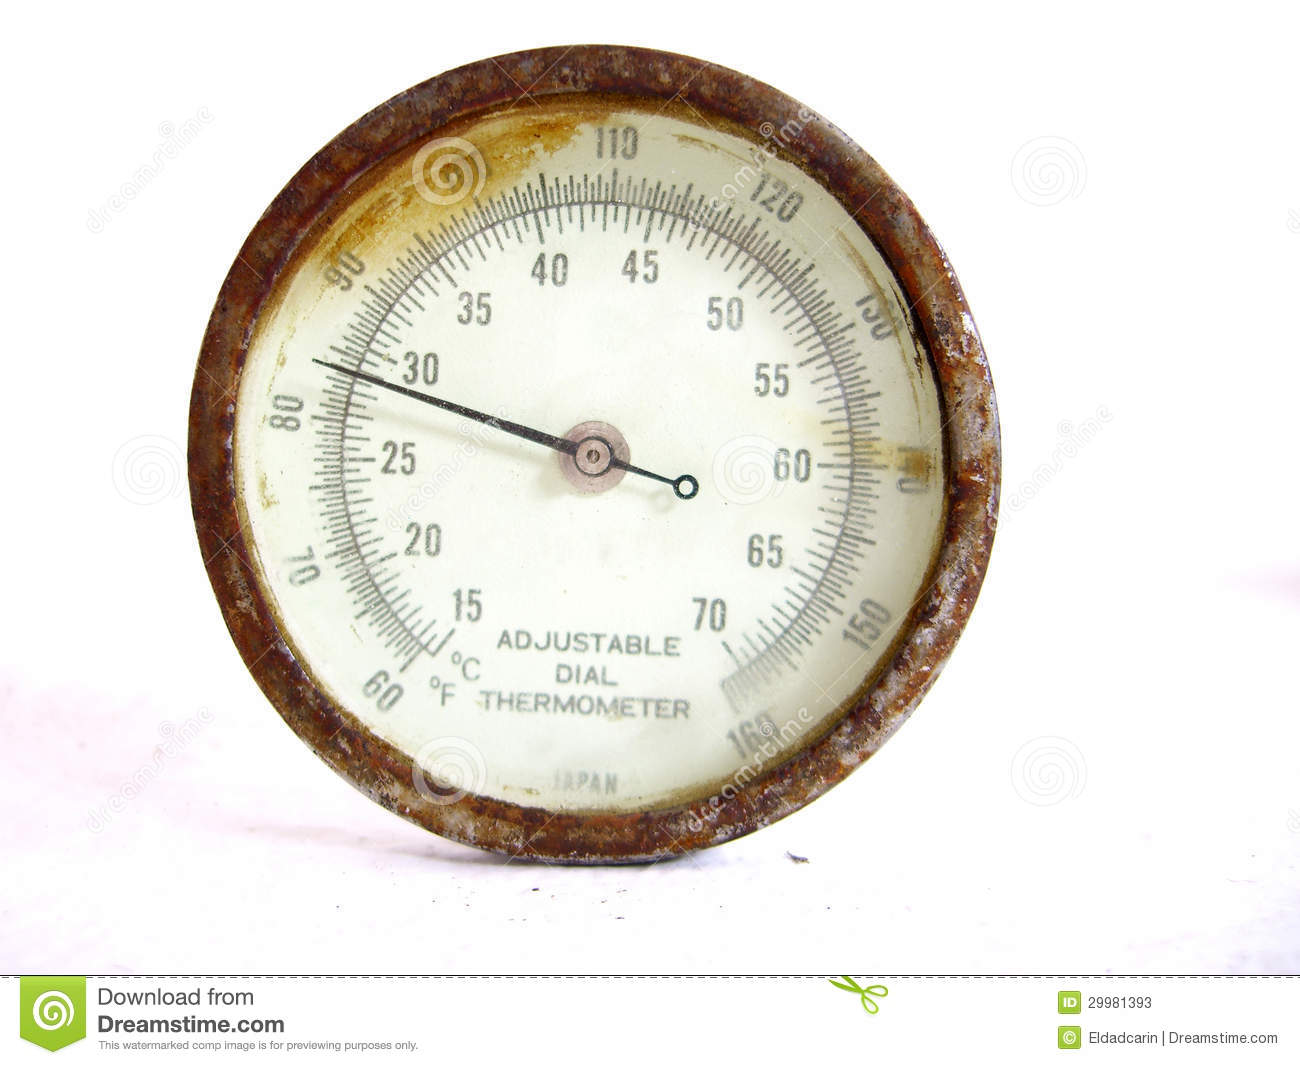 Adjustable Dial Thermometer Stock Photos   Image  29981393